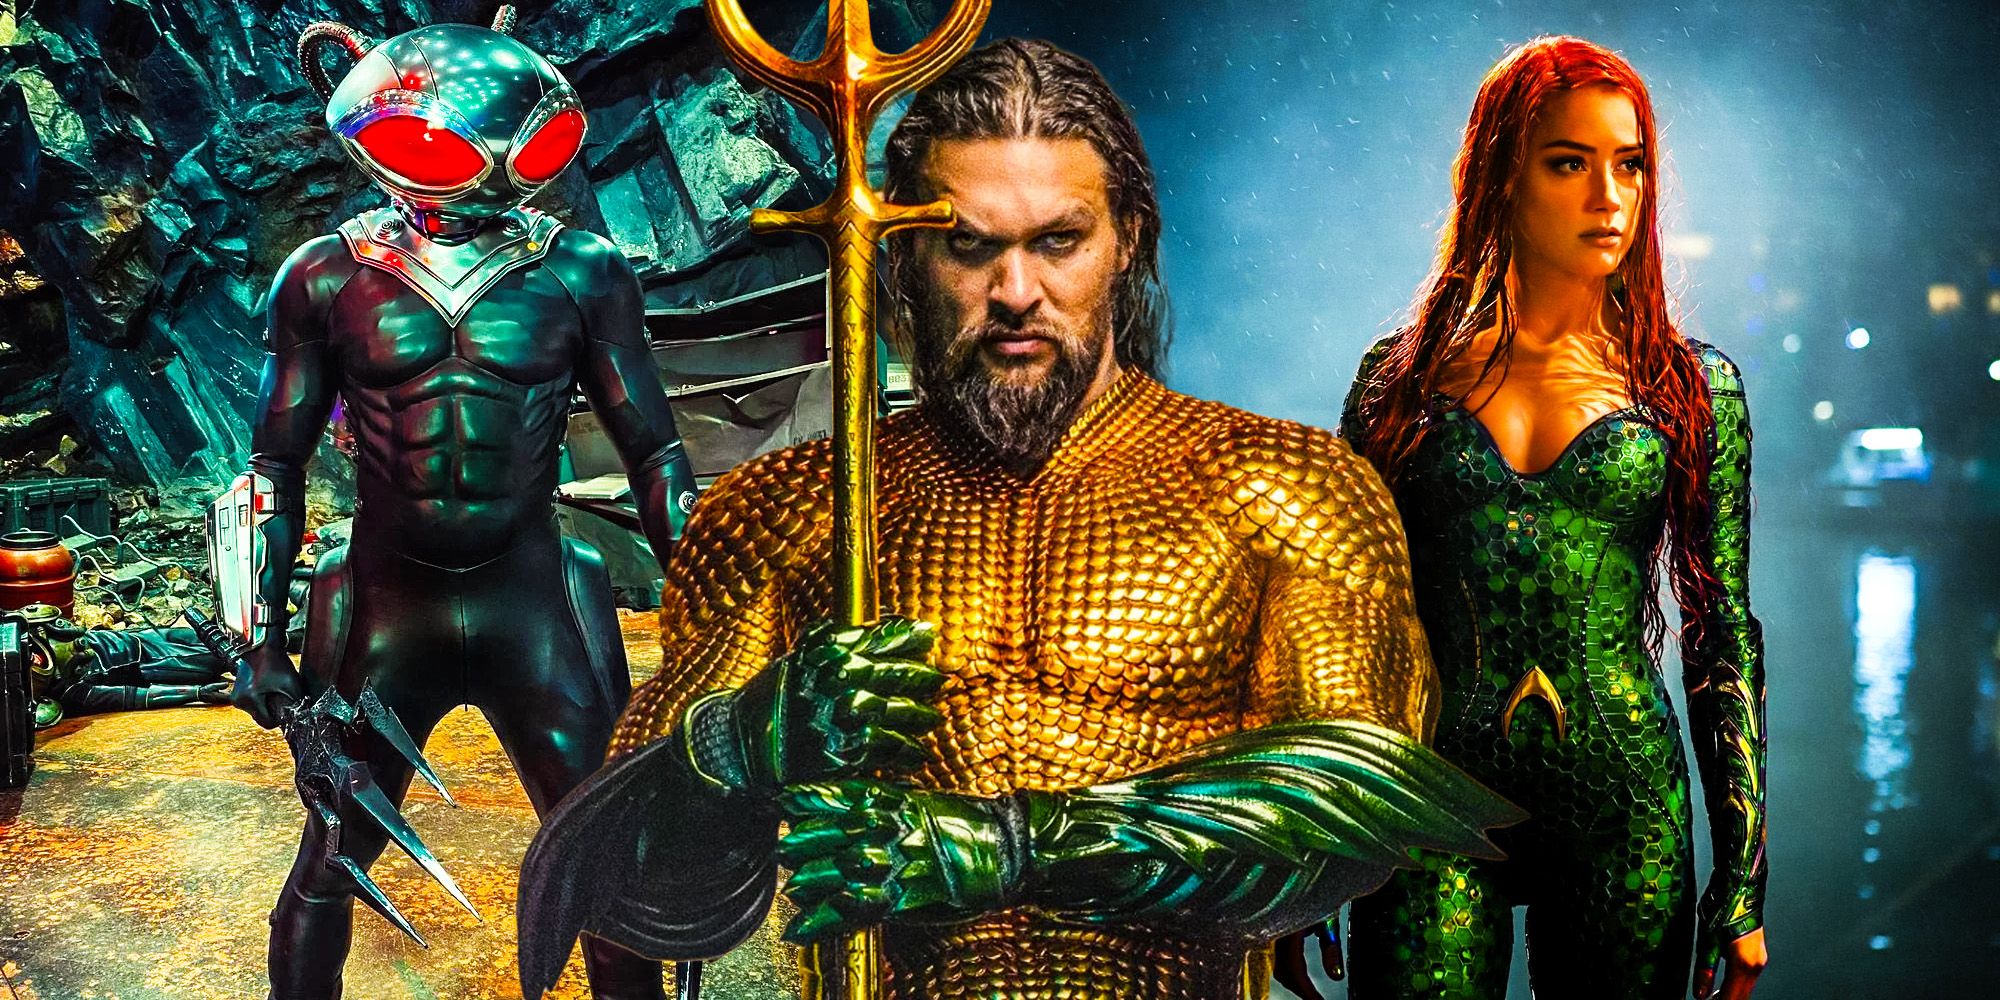 Aquaman & The Lost Kingdom -Trailer, News, Story, Every Update